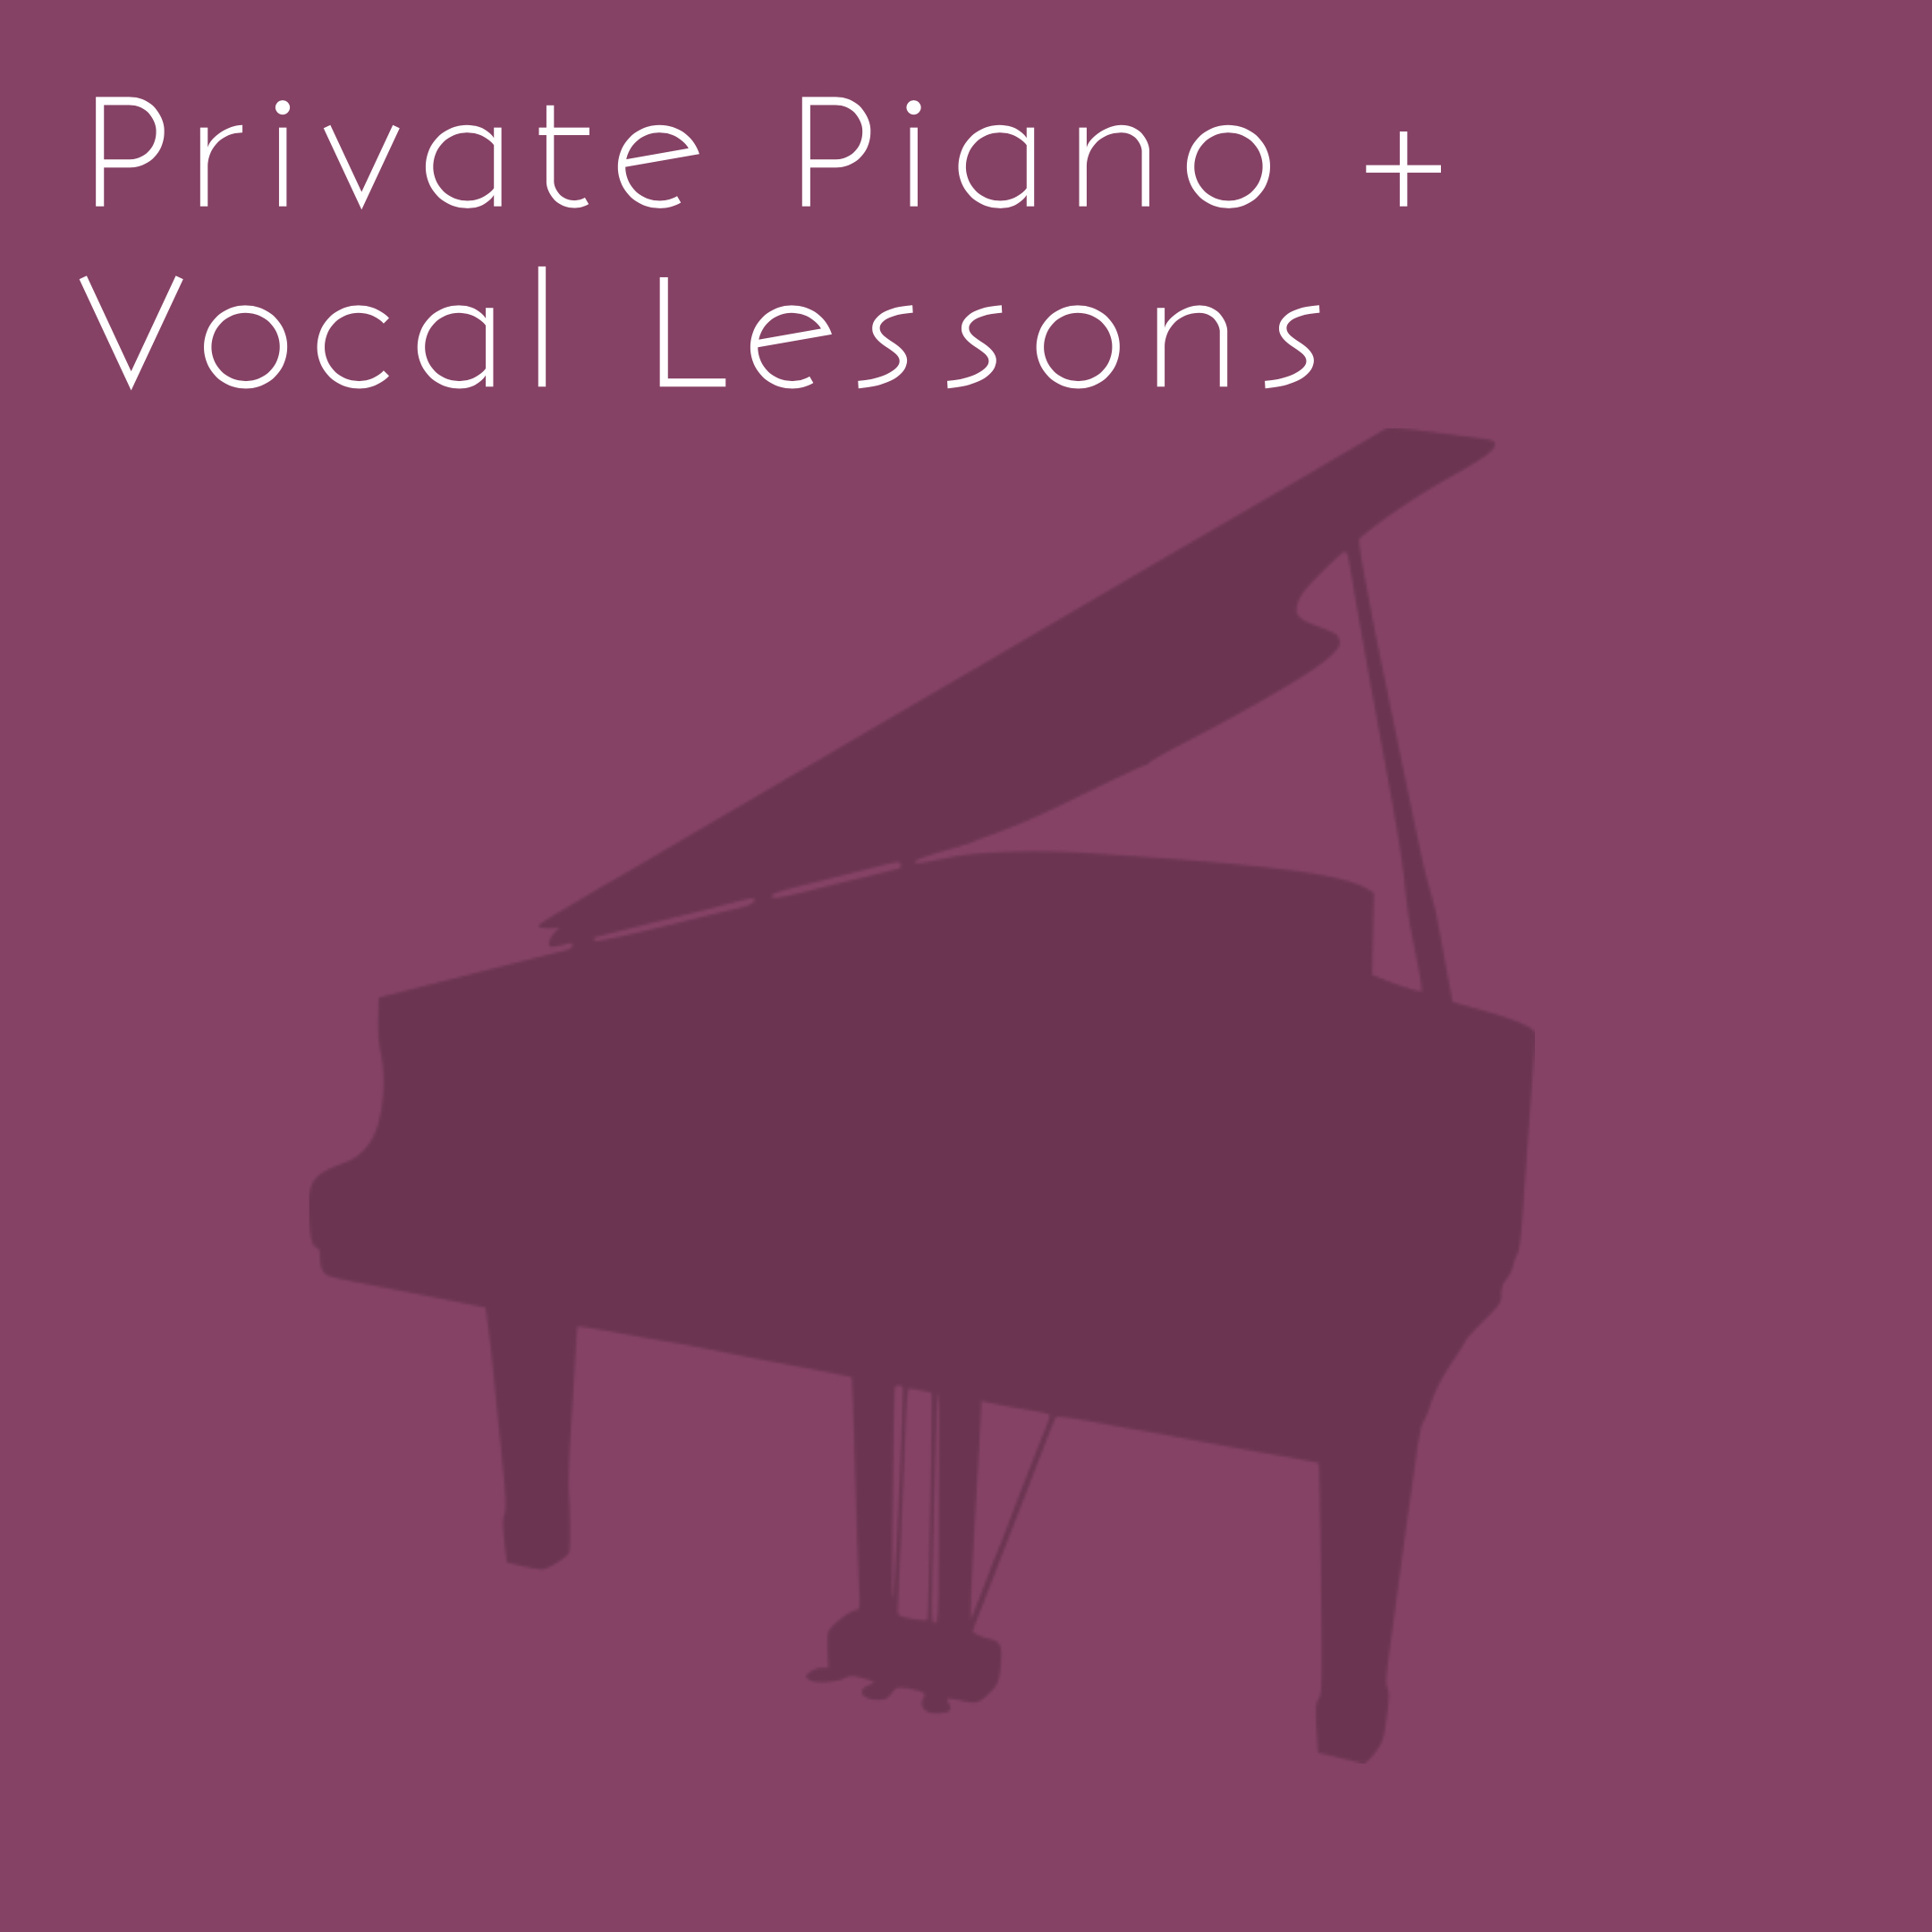 Piano and Voice Lessons.jpg